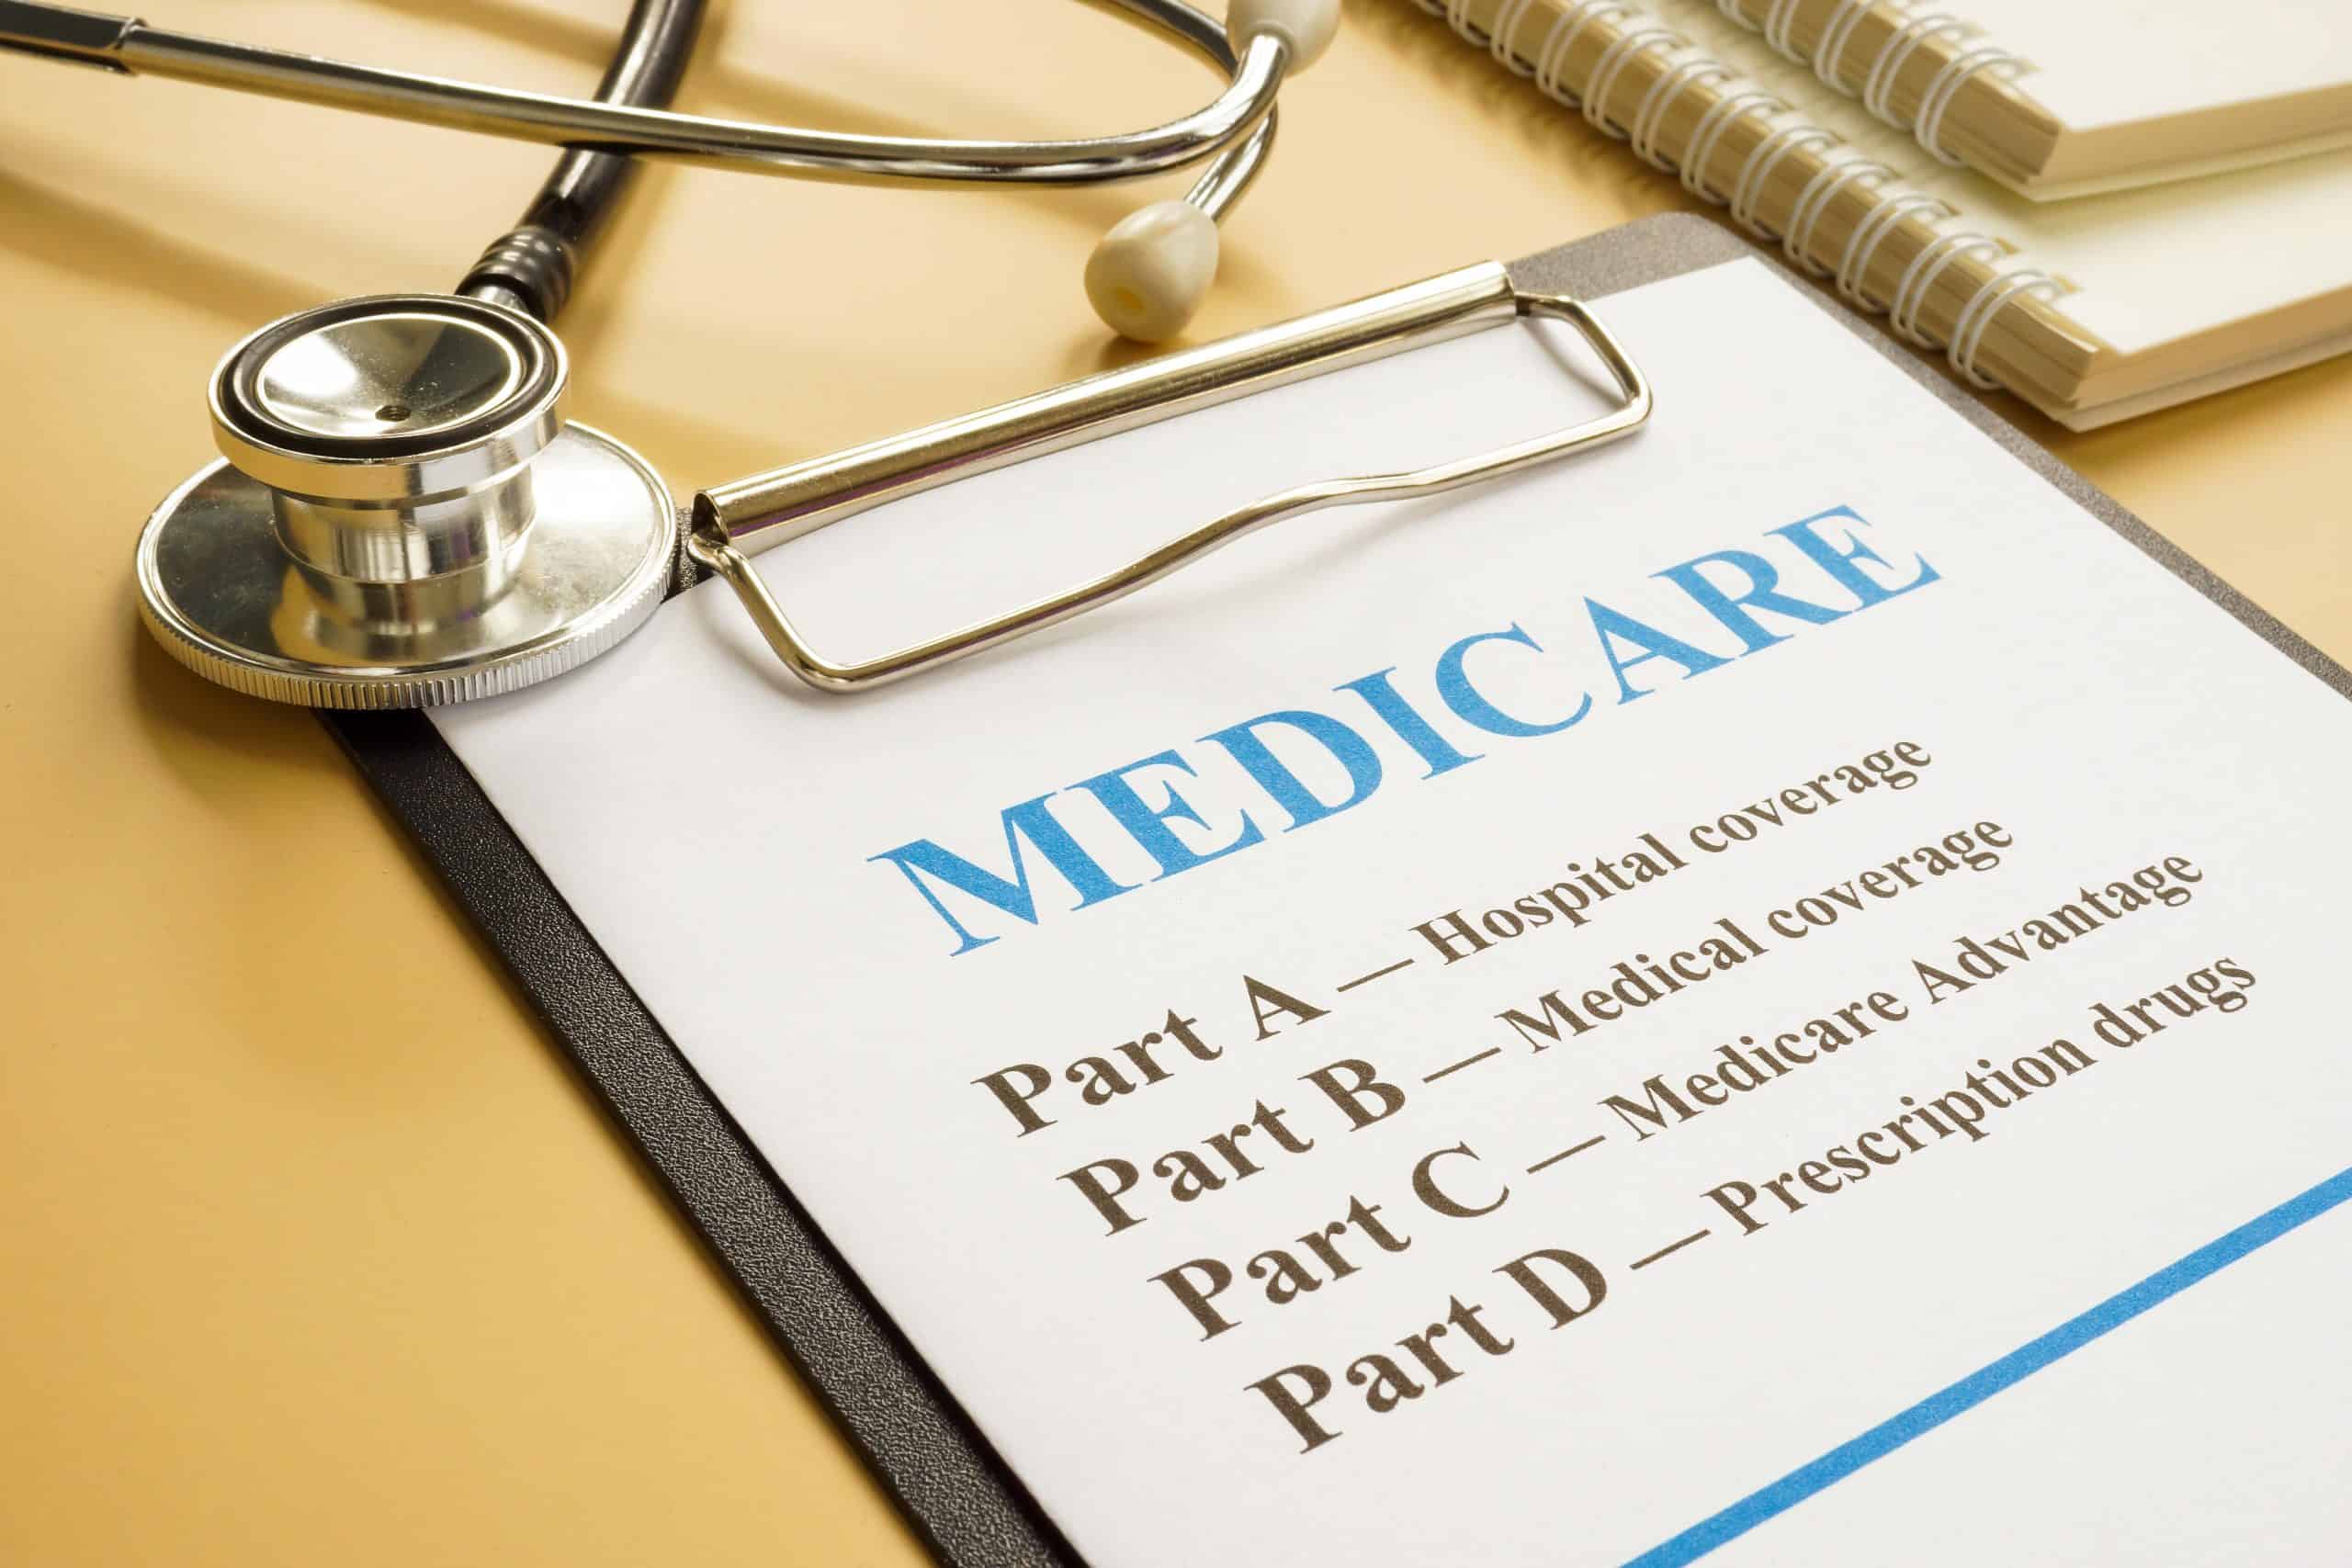 Does your nursing home accept Medicare?